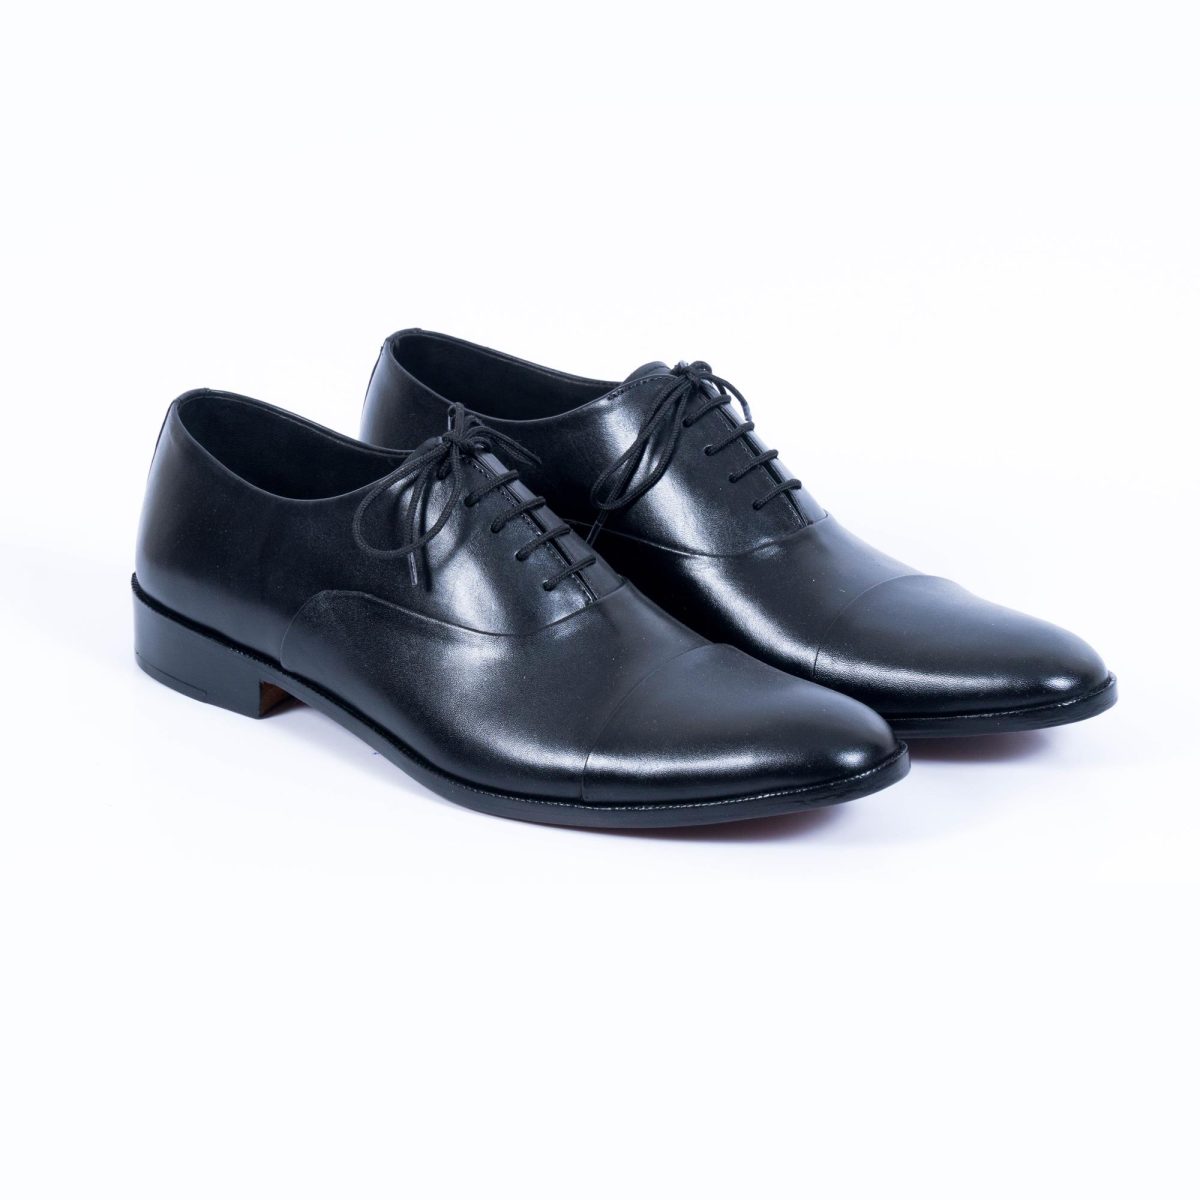 Spadera Handmade Leather Shoes - Inky Oxford